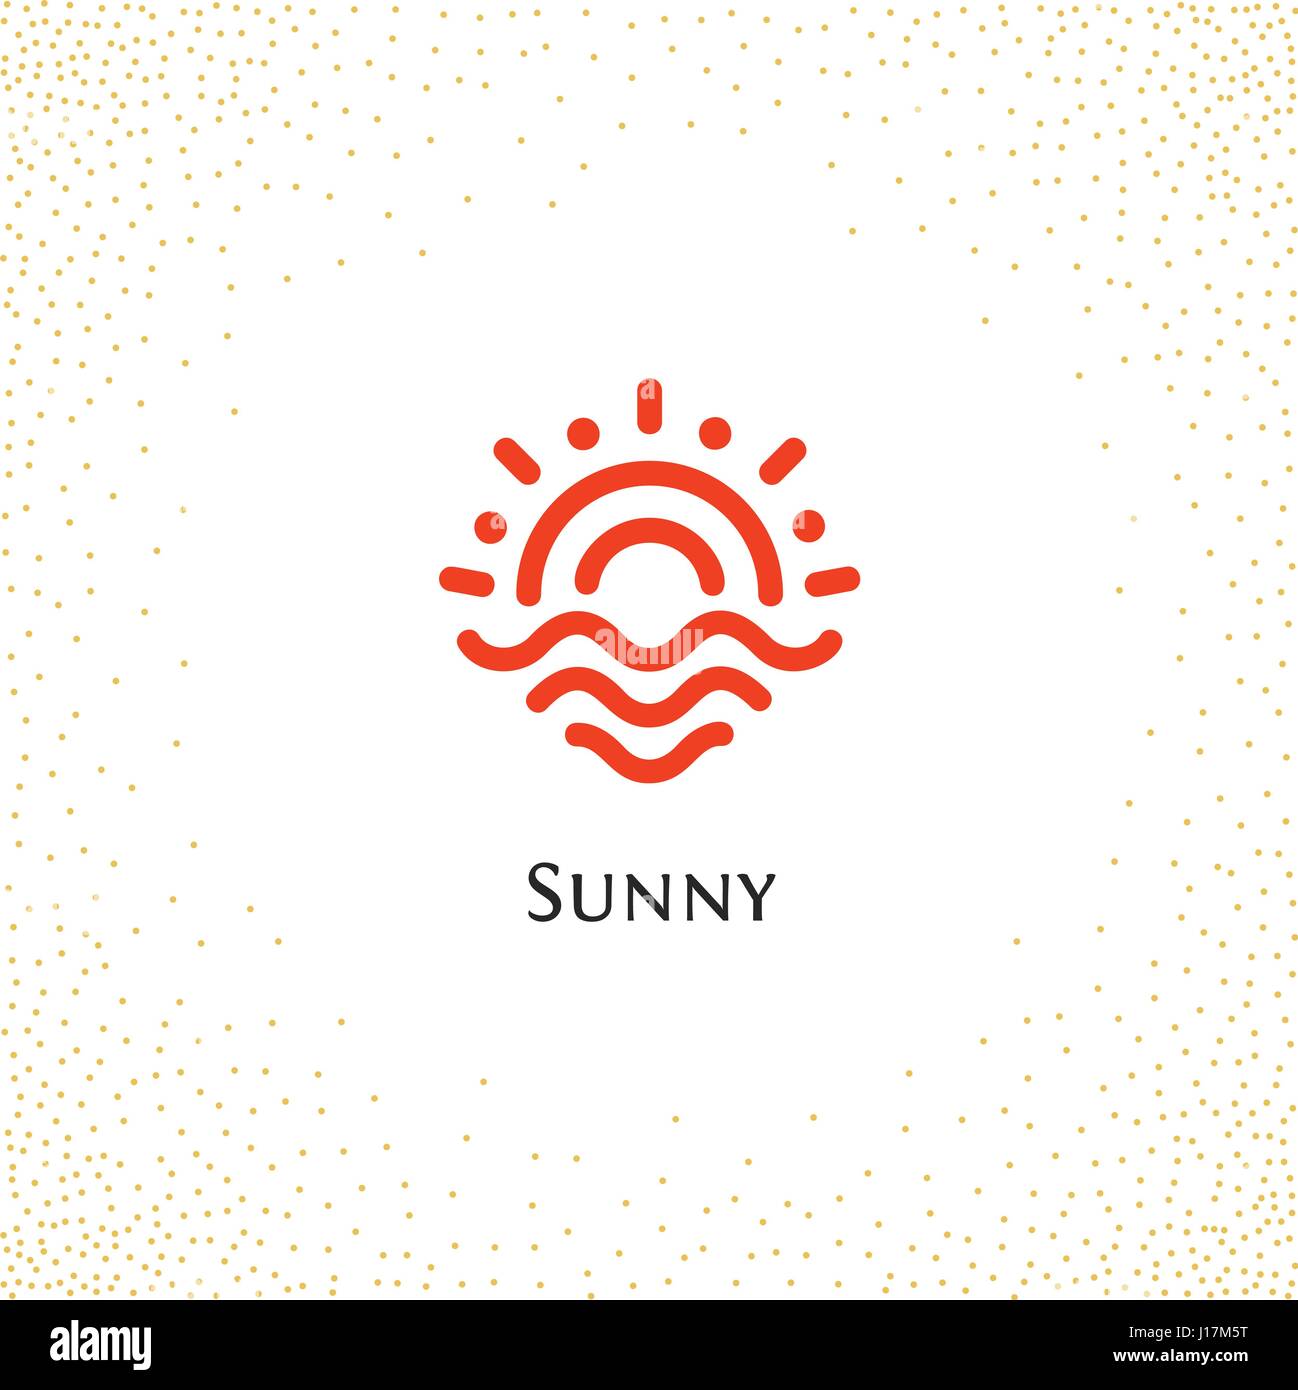 Isolated abstract round shape orange color logo , sun logotype vector illustration on a background of dots. Stock Vector